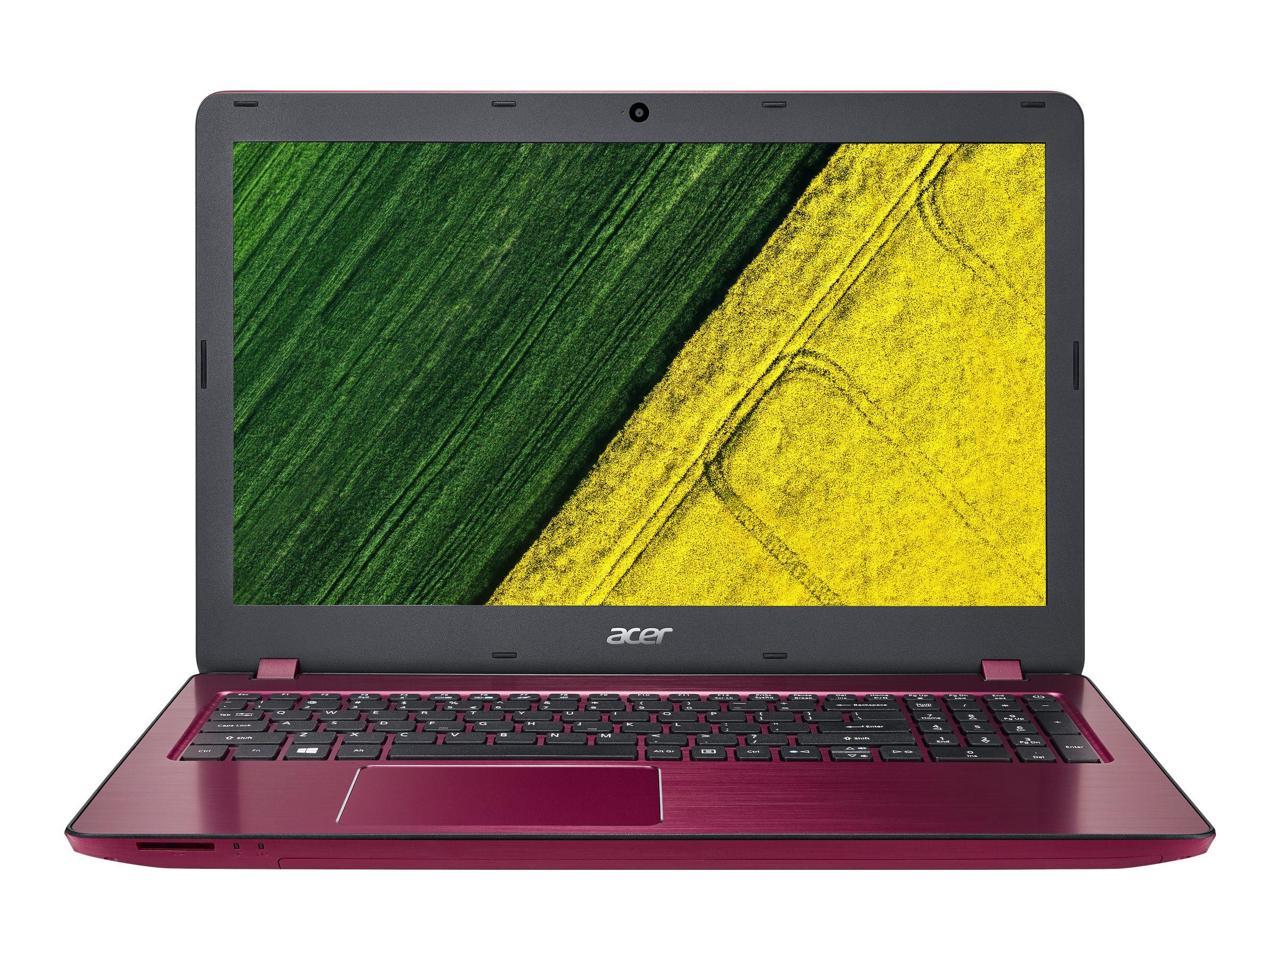 Acer Aspire F5-573-55W1 15.6" LED (ComfyView) Notebook - Intel Core i5